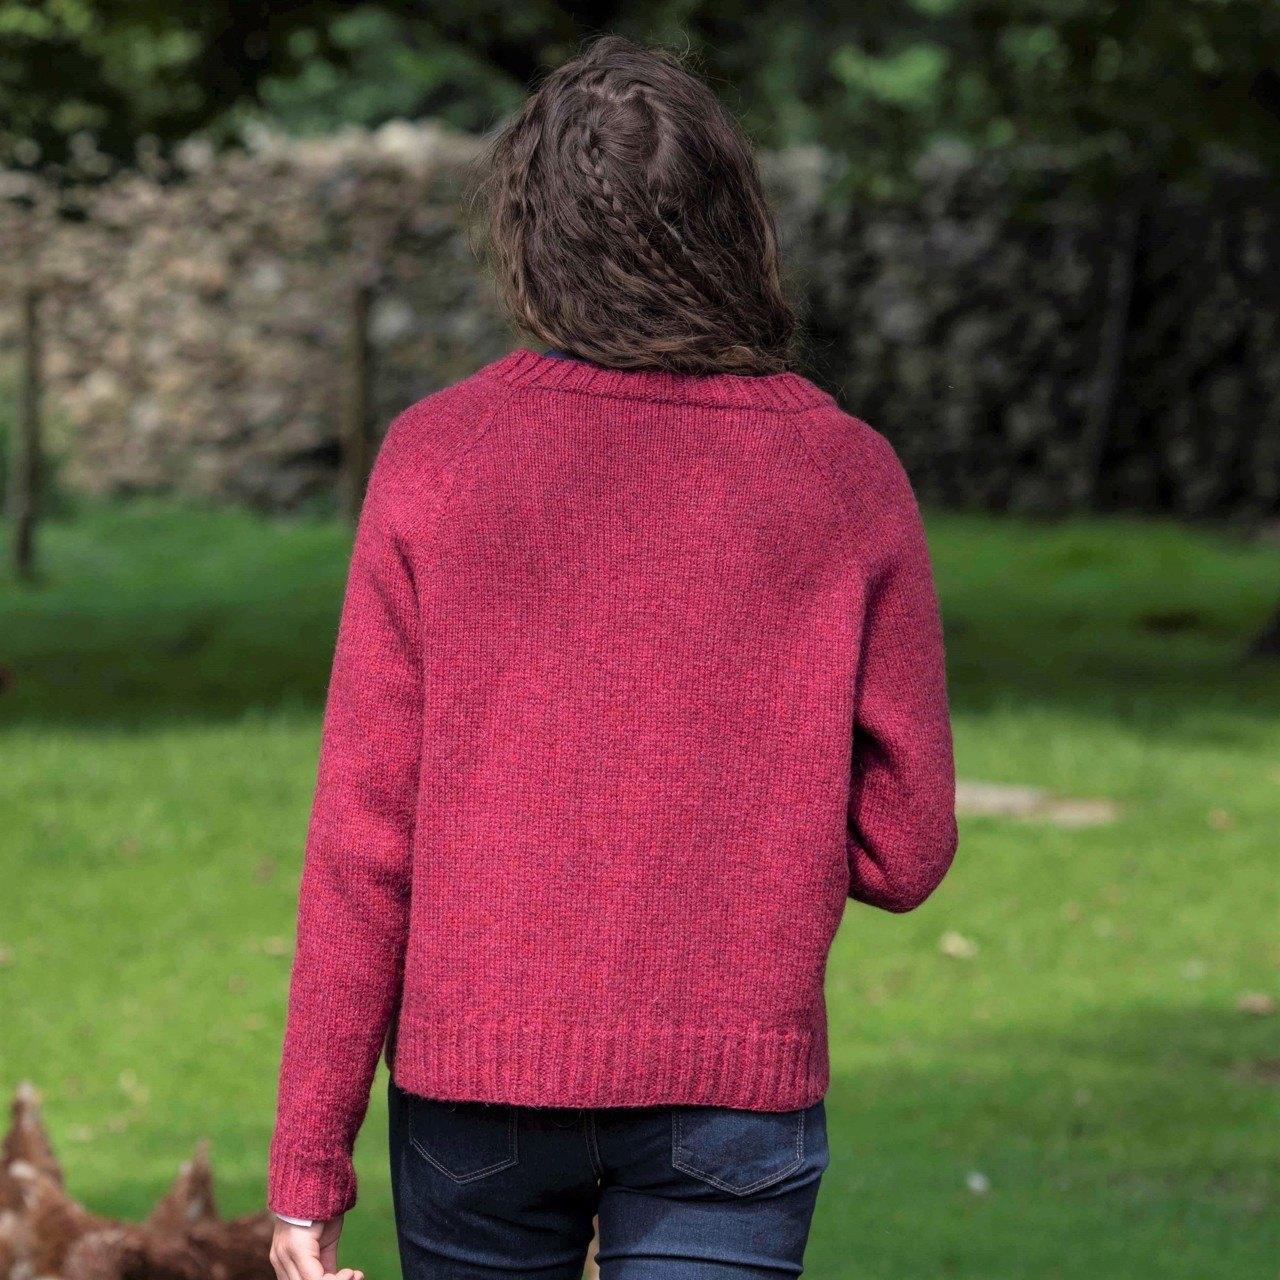 The Fibre Co. One Cardigan Pattern -  - Downloadable Knitting Pattern